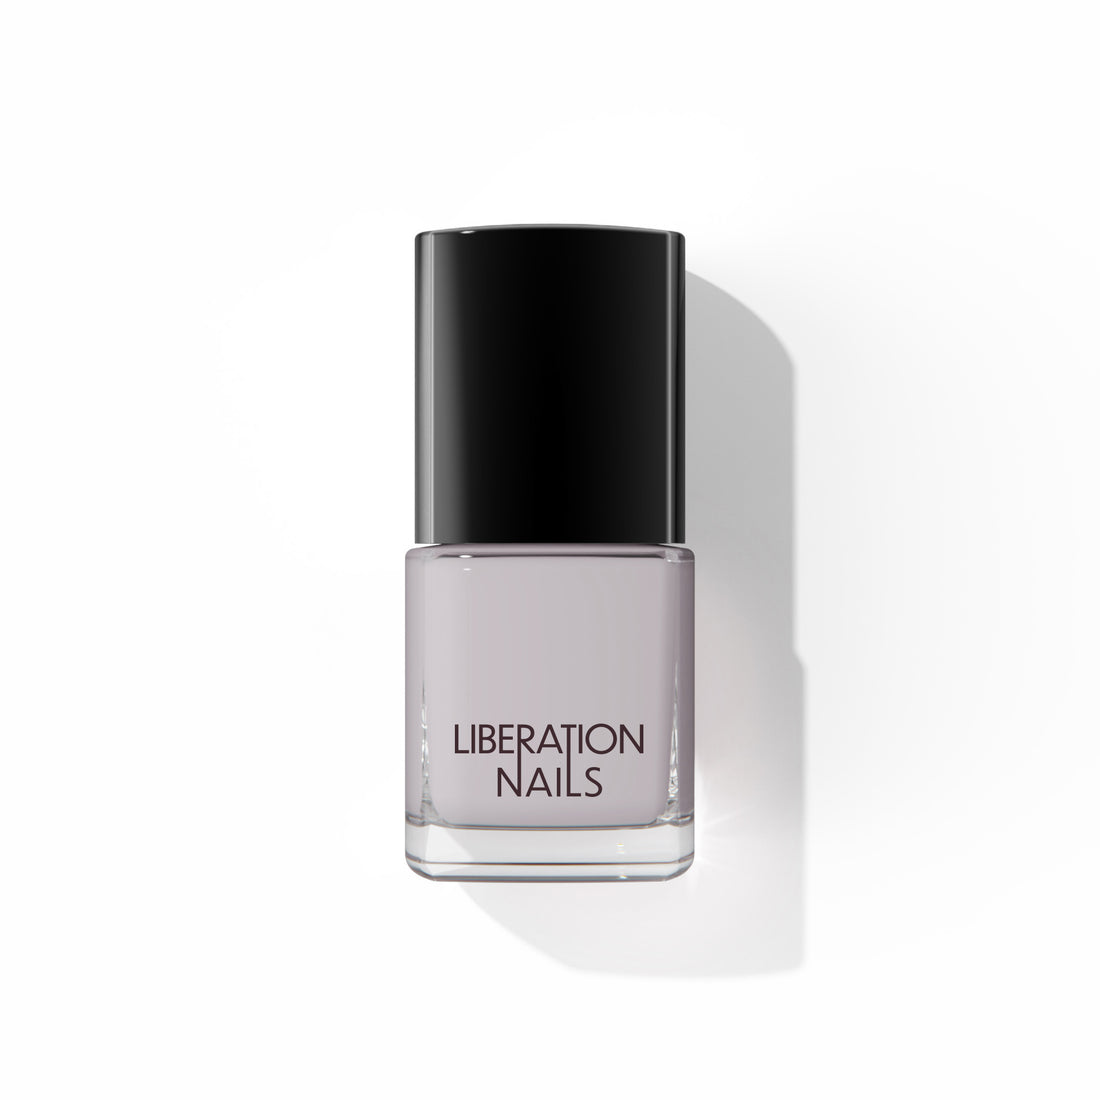 A bottle of Liberation Nails nail polish in a soft purple-y gray color, Seeker.